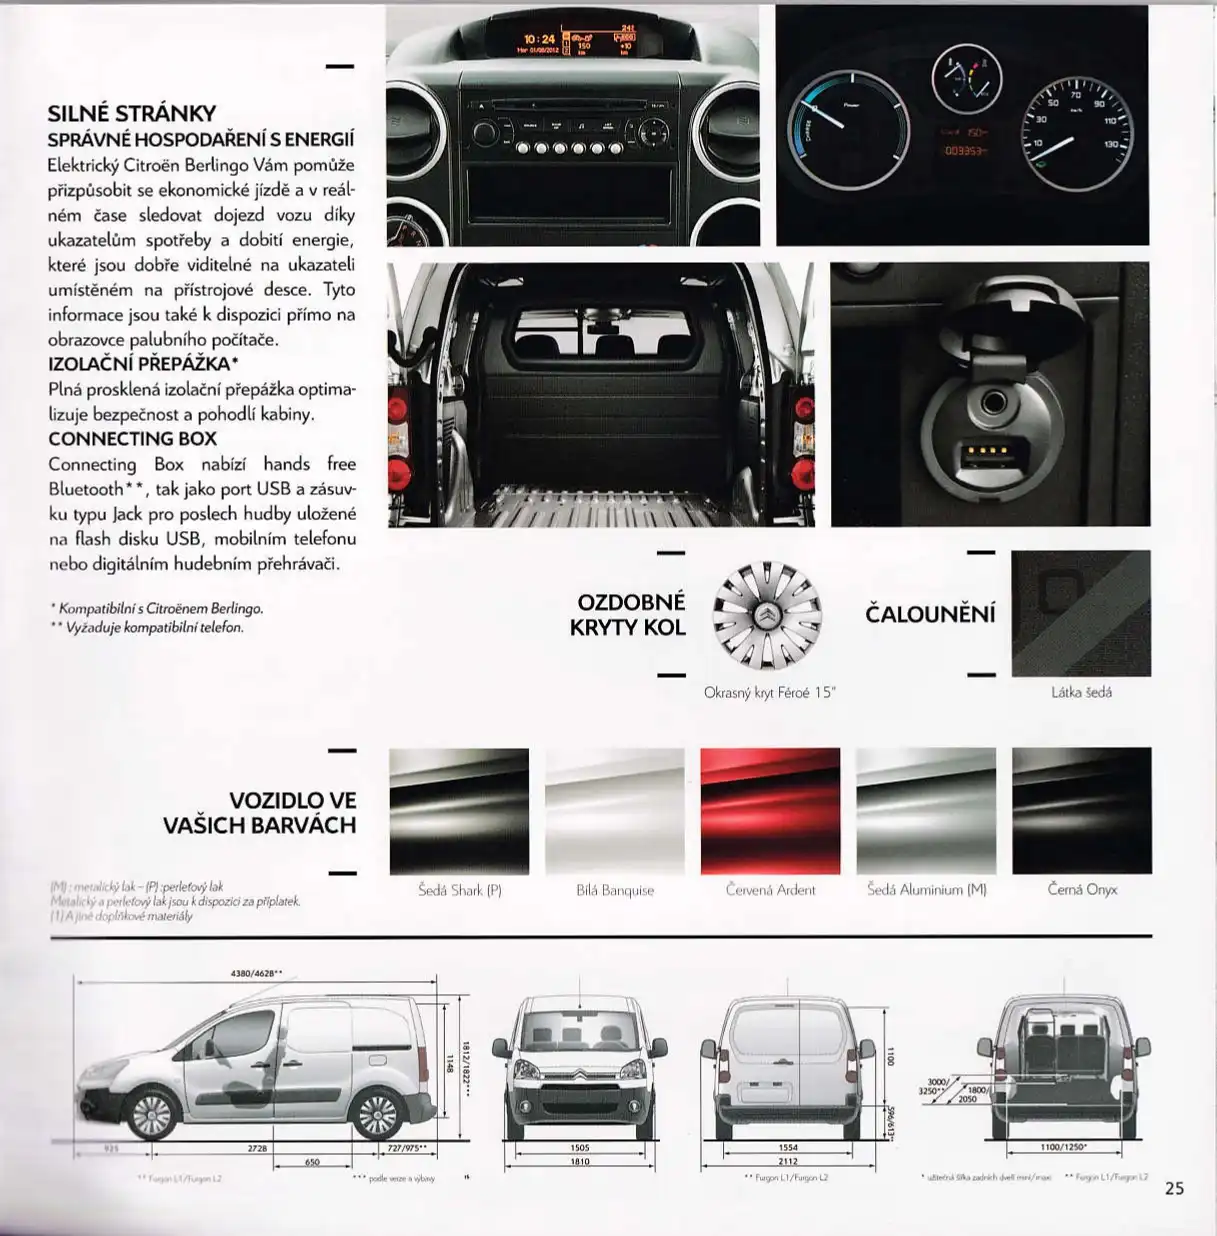 vehicle example, and color swatches